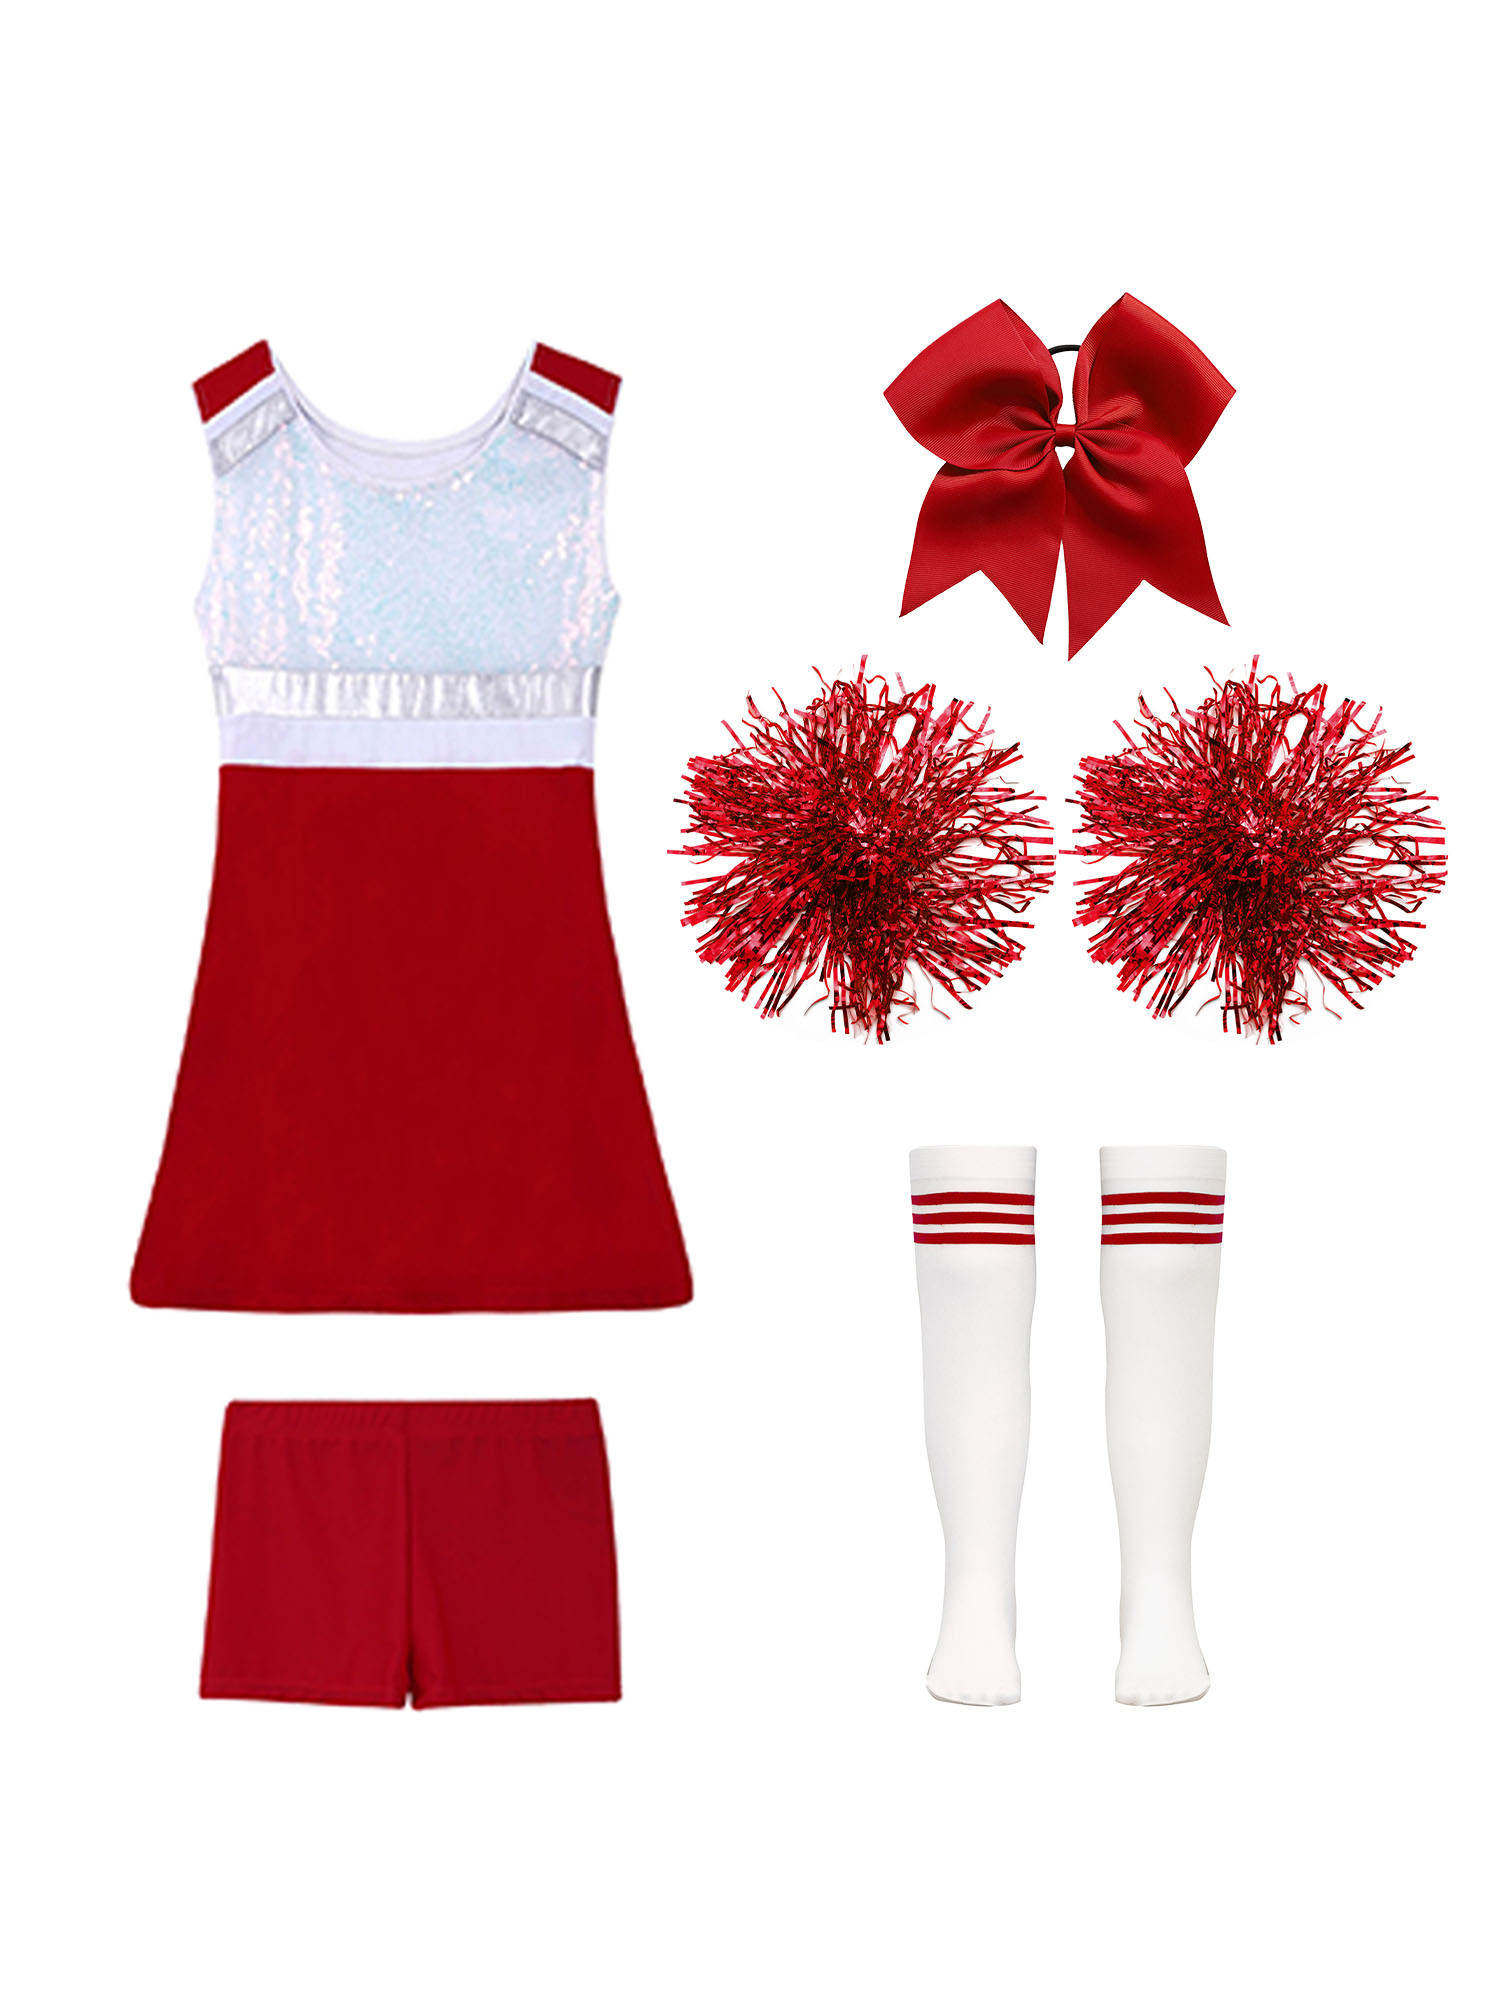 TiaoBug Kids Girls Cheer Leader Uniform Sports Games Cheerleading Dance Outfits Halloween Carnival Fancy Dress Up B Red 8 - image 4 of 5